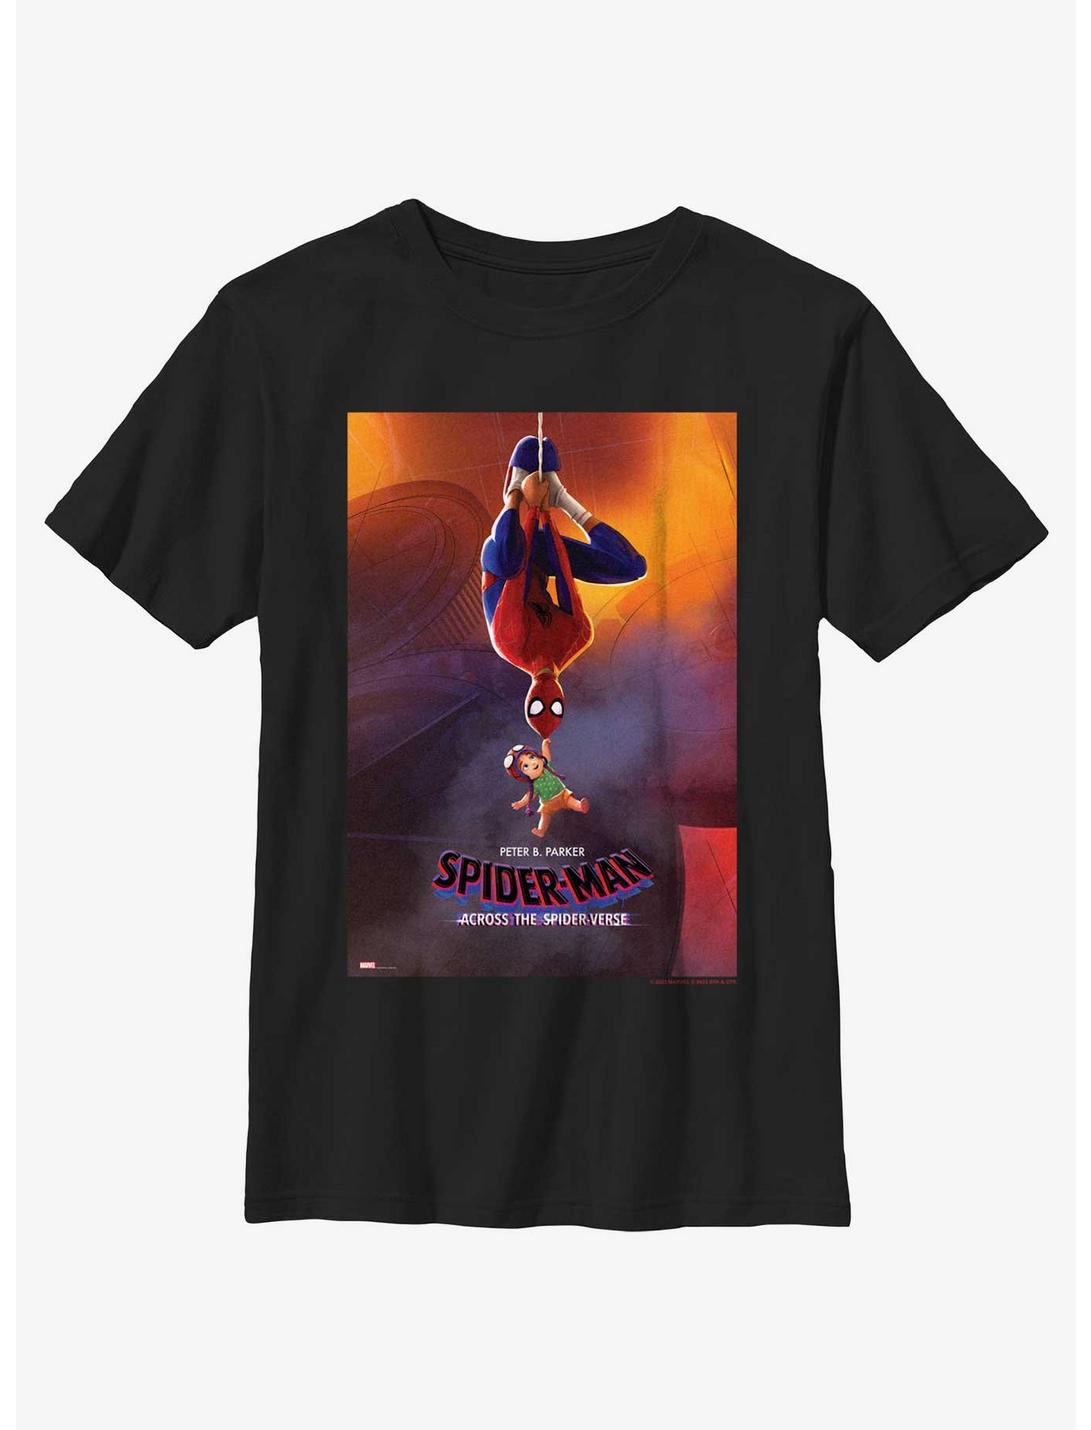 Spider-Man: Across The Spider-Verse Peter B. Parker Poster Youth T-Shirt, BLACK, hi-res